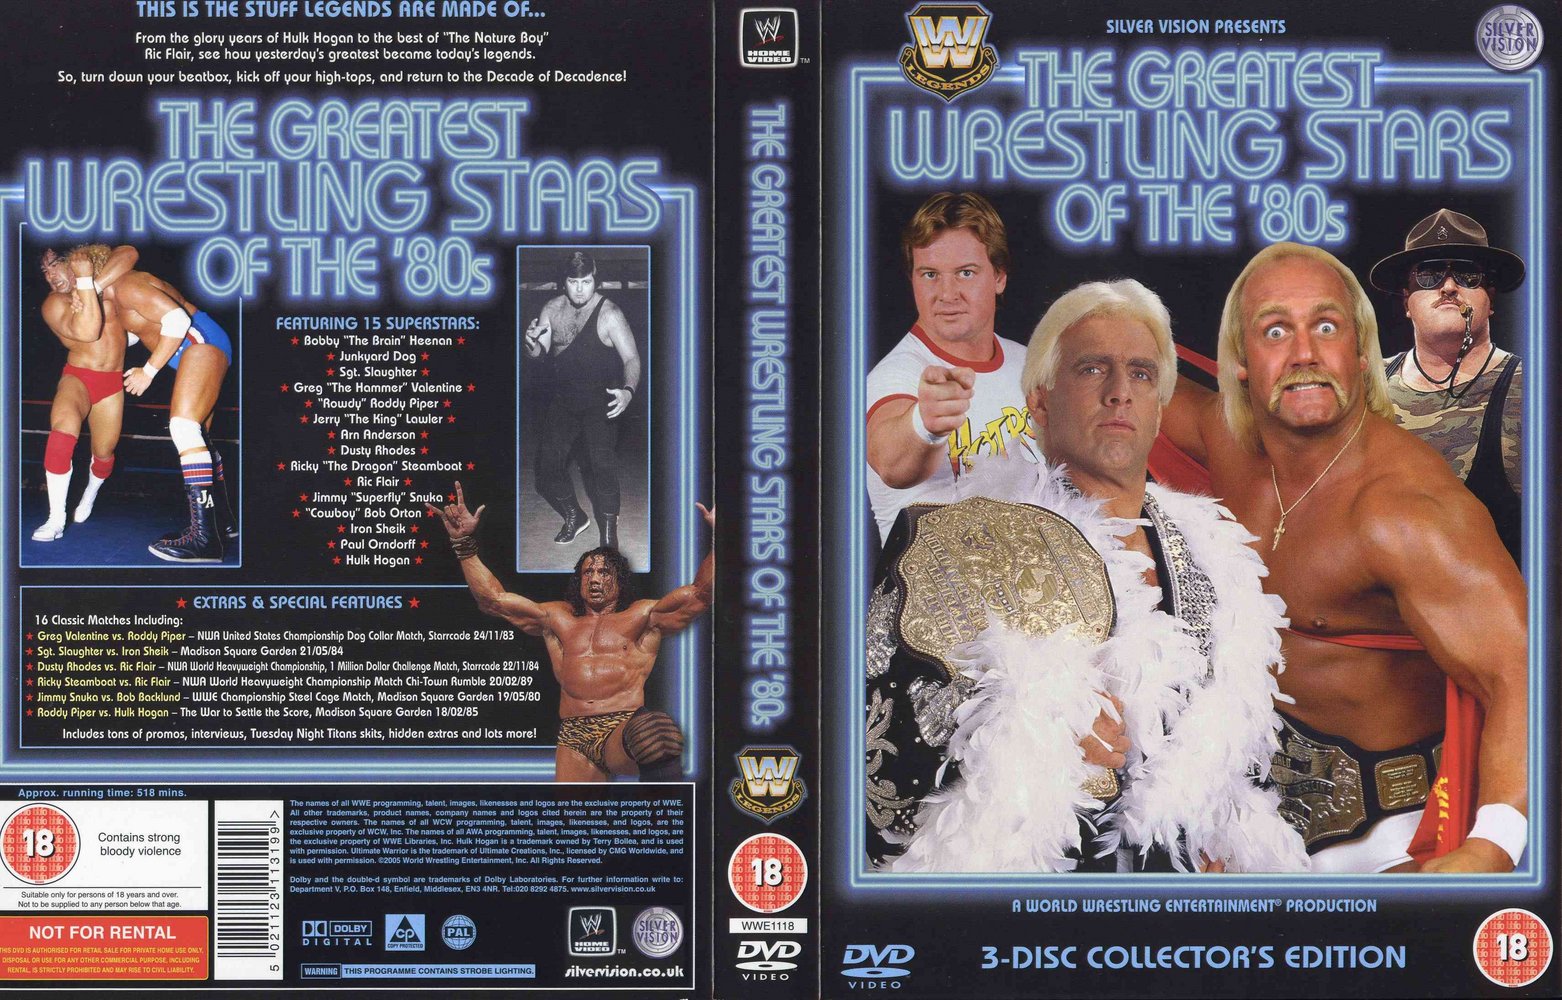 Jaquette DVD WWE Greatest wrestling stars of the 80s